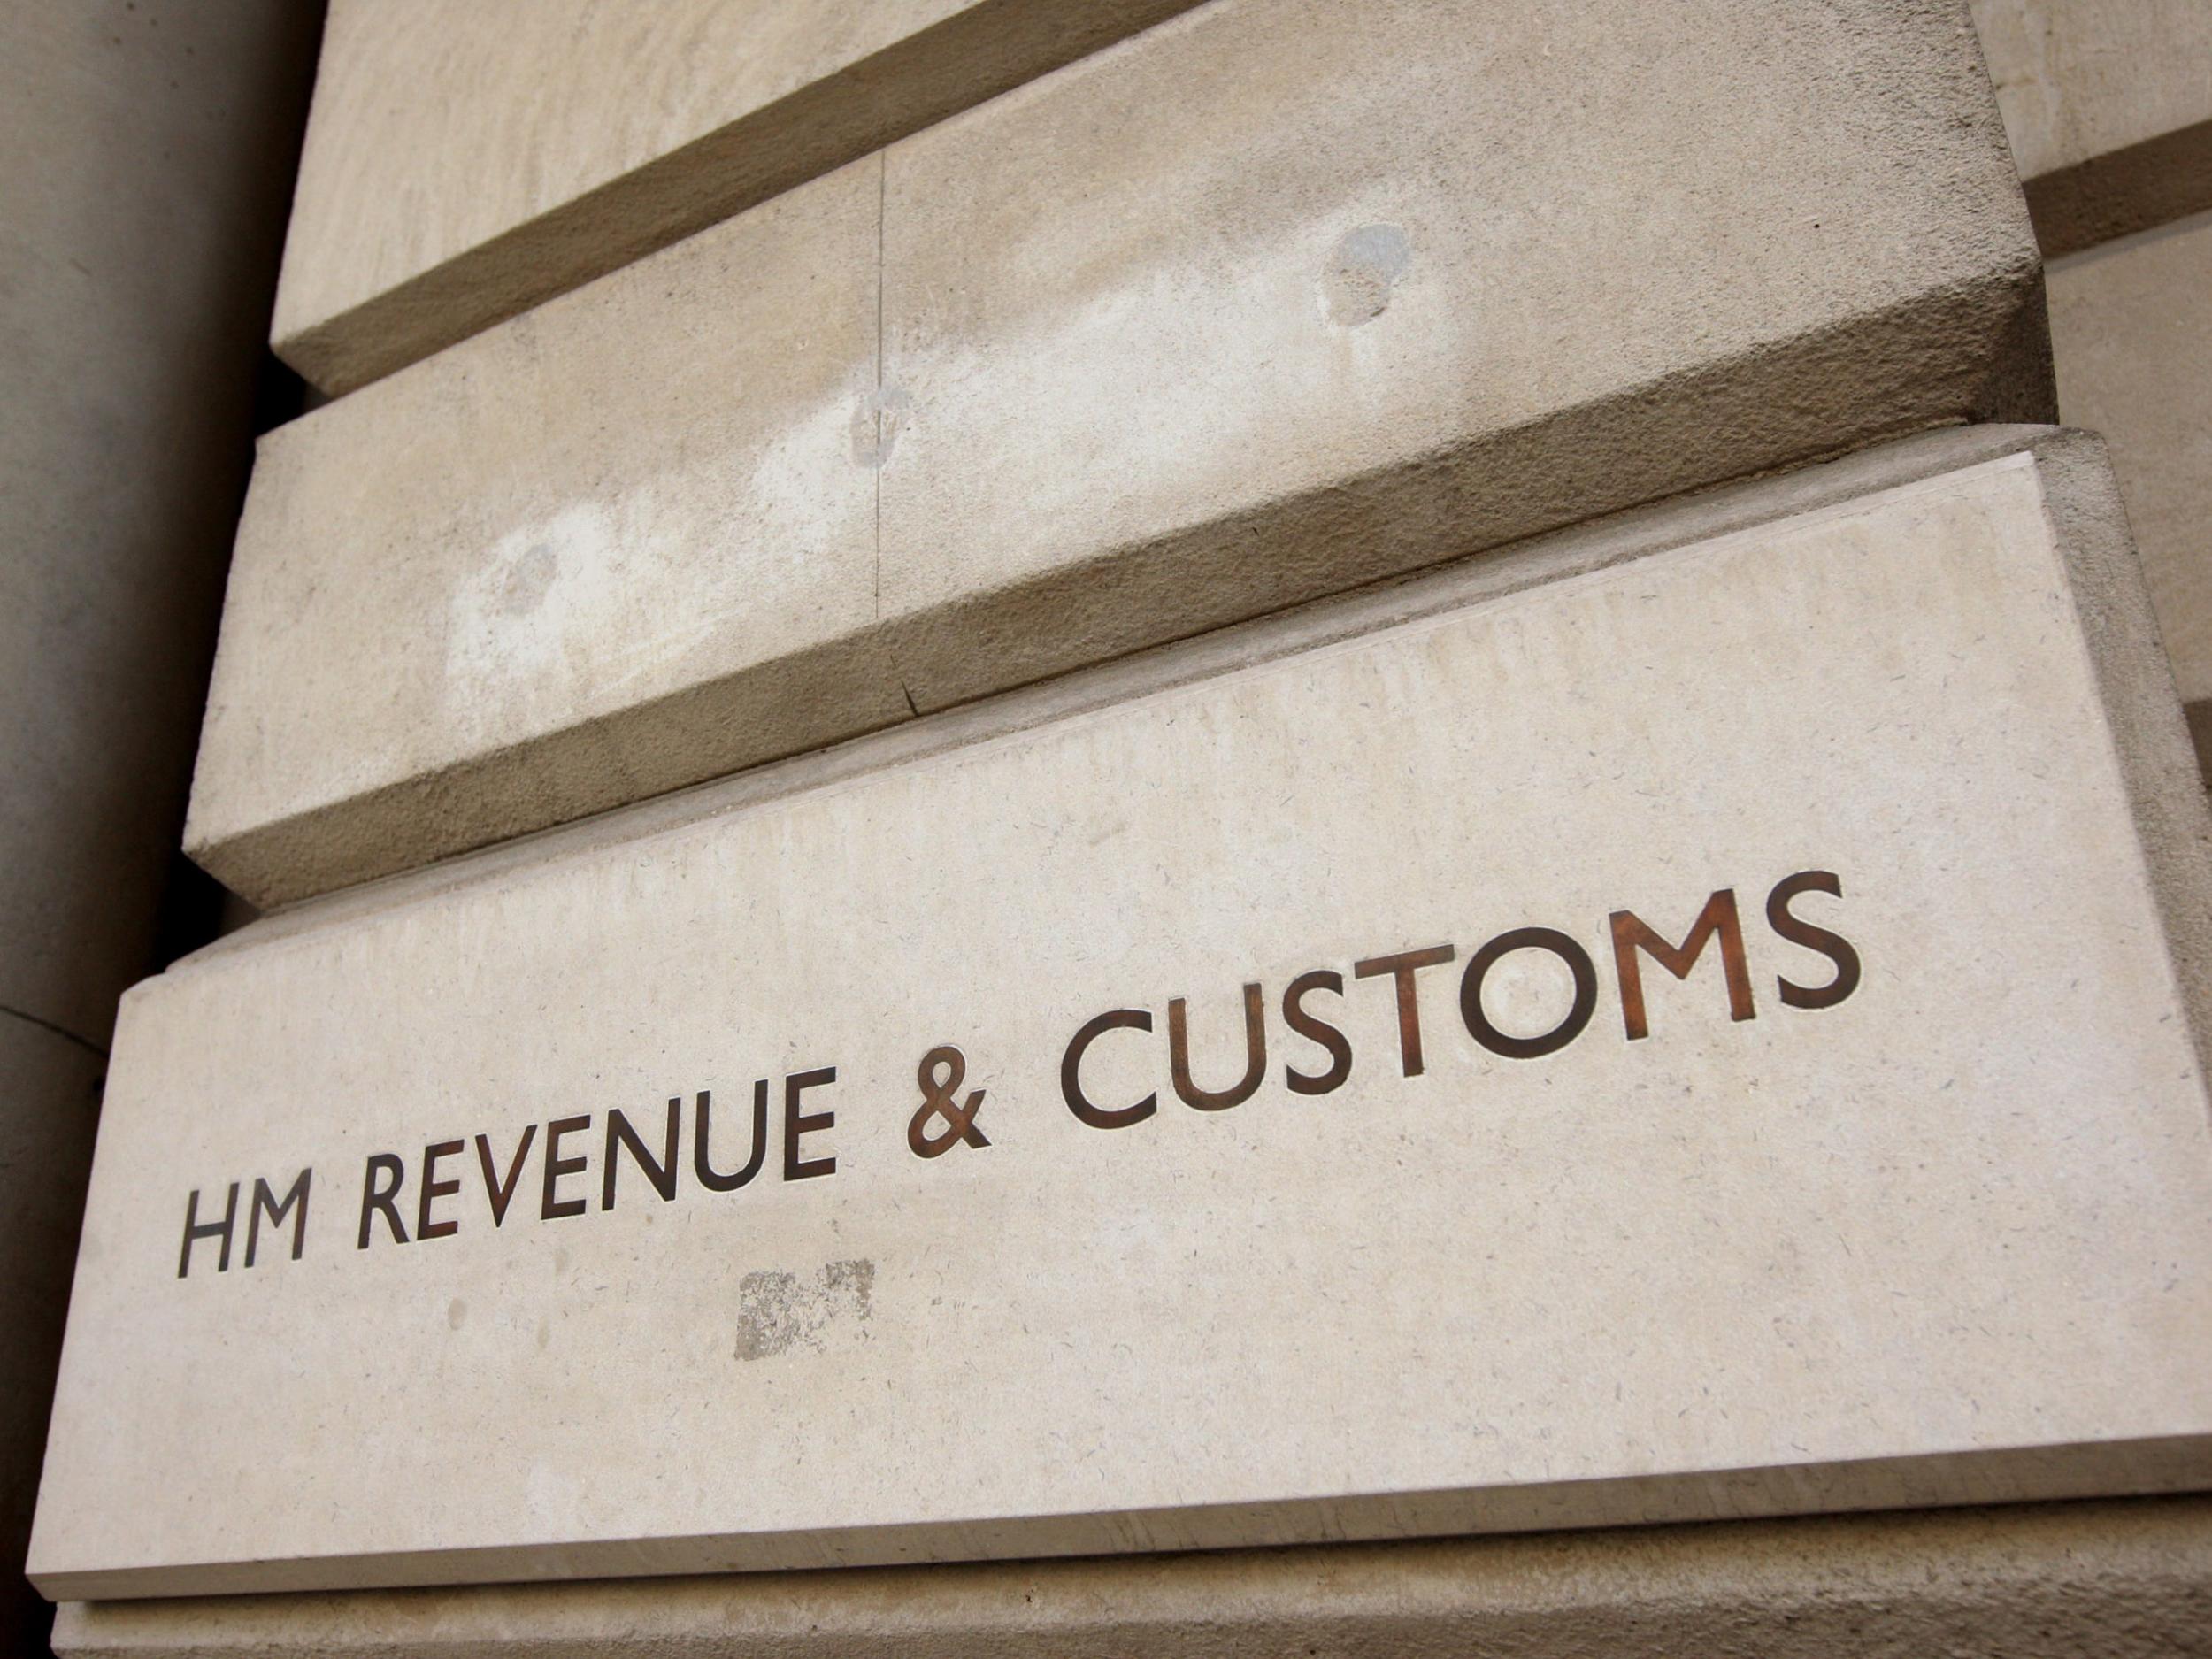 A spokesperson for HMRC said the email was 'regrettable'